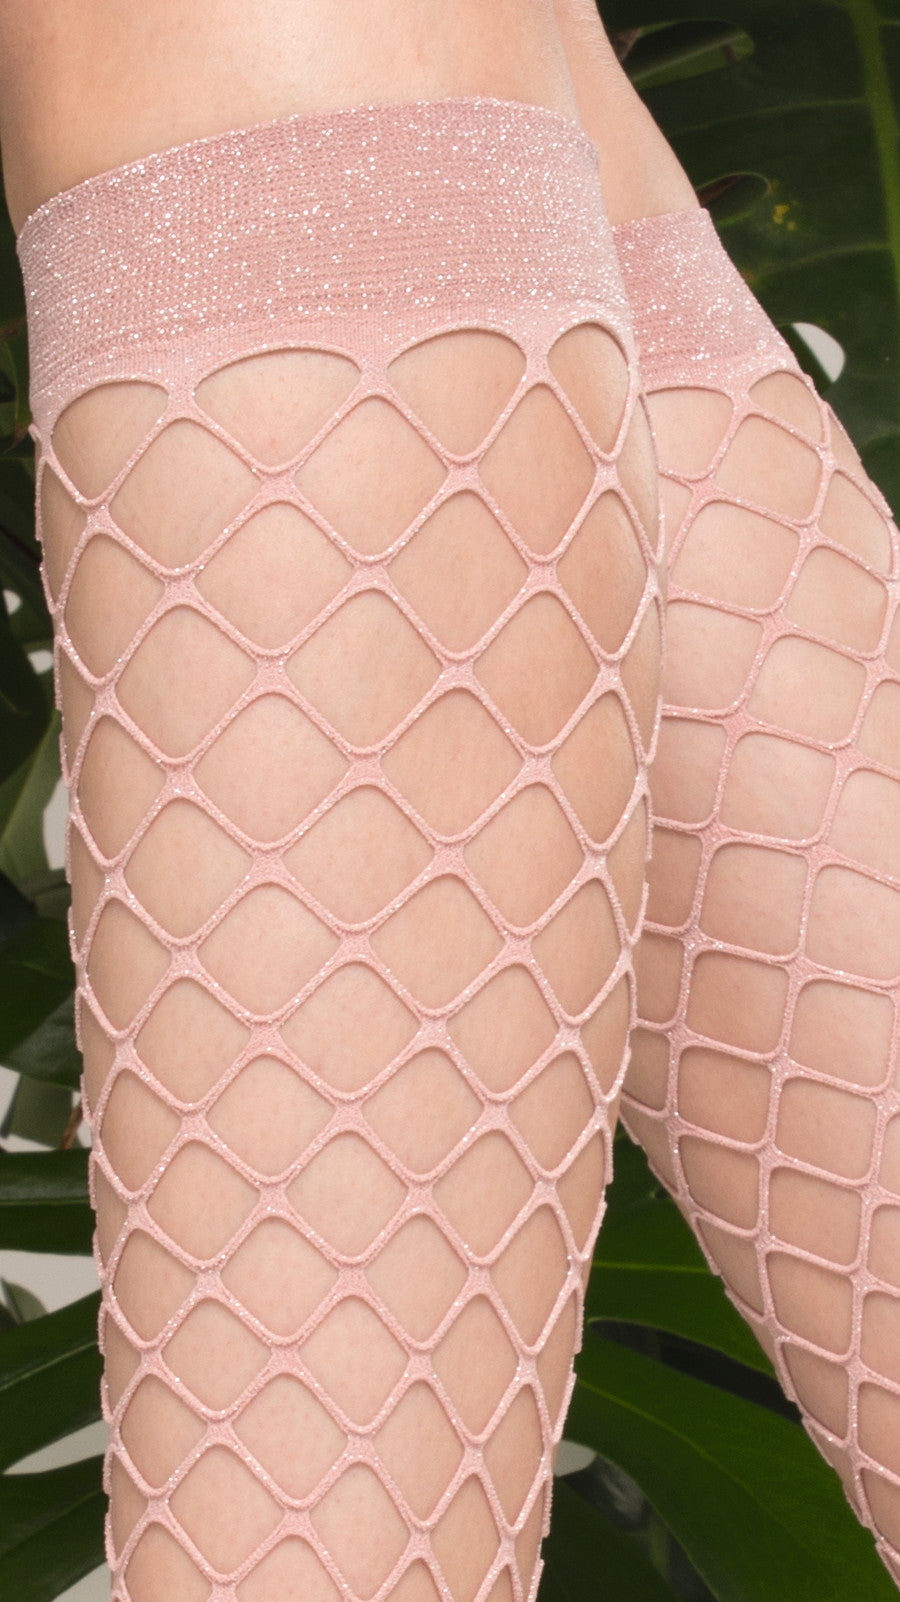 Trasparenze Ananas Gambaletto - wide fence fishnet knee-high sock in pale pink with micro net toe and silver sparkly lurex